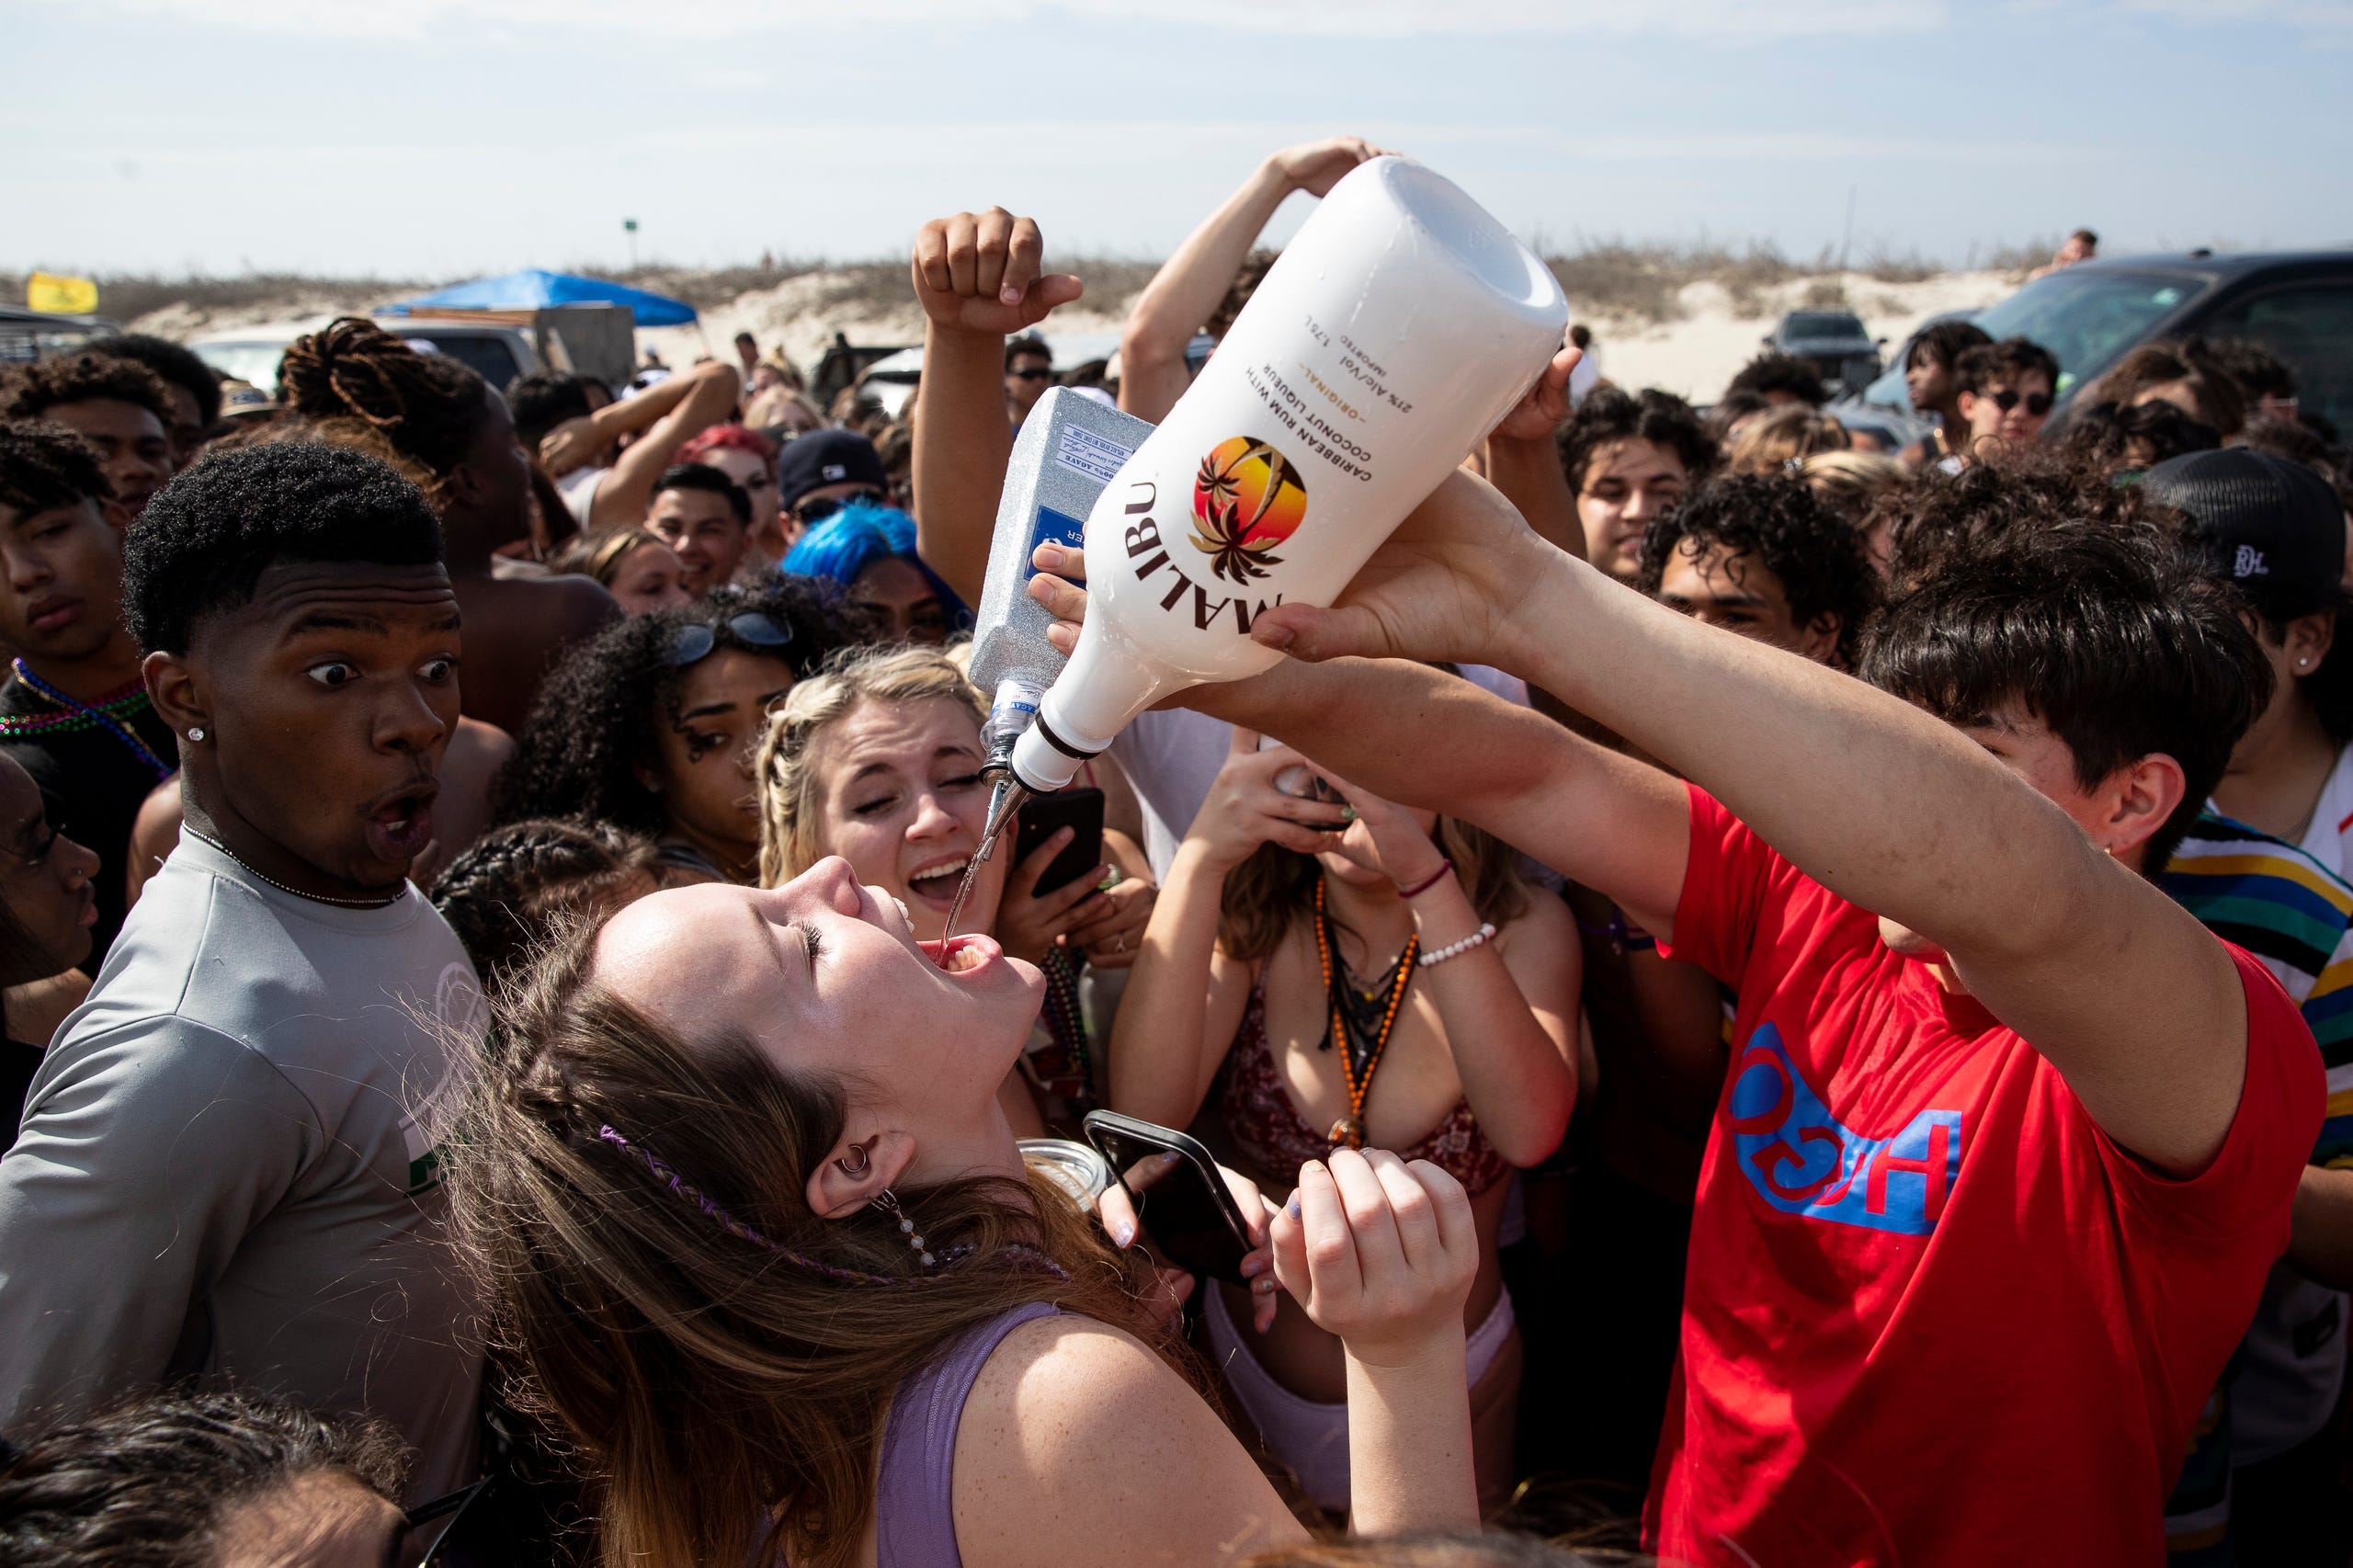 Spring Break 2021: College students return to beaches amid pandemic